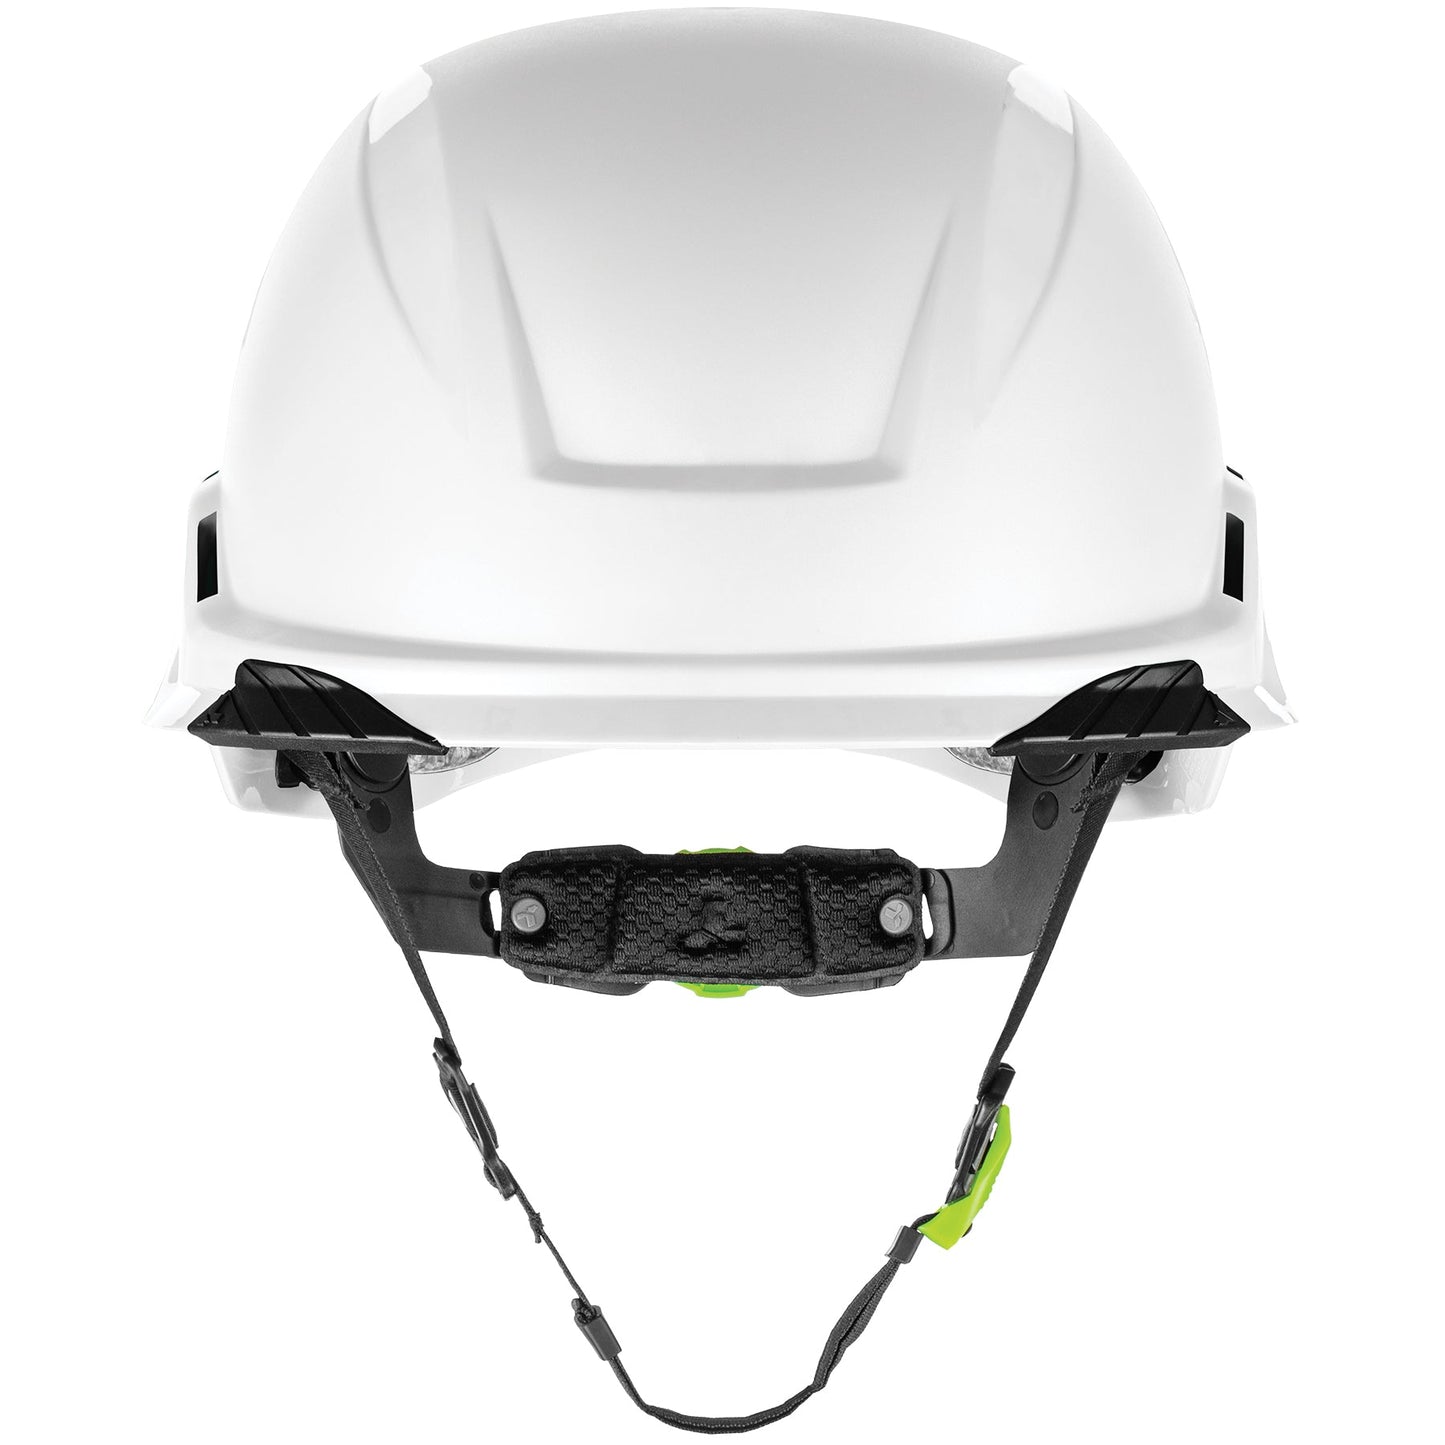 RADIX Safety Helmet - Non-Vented - LIFT Safety